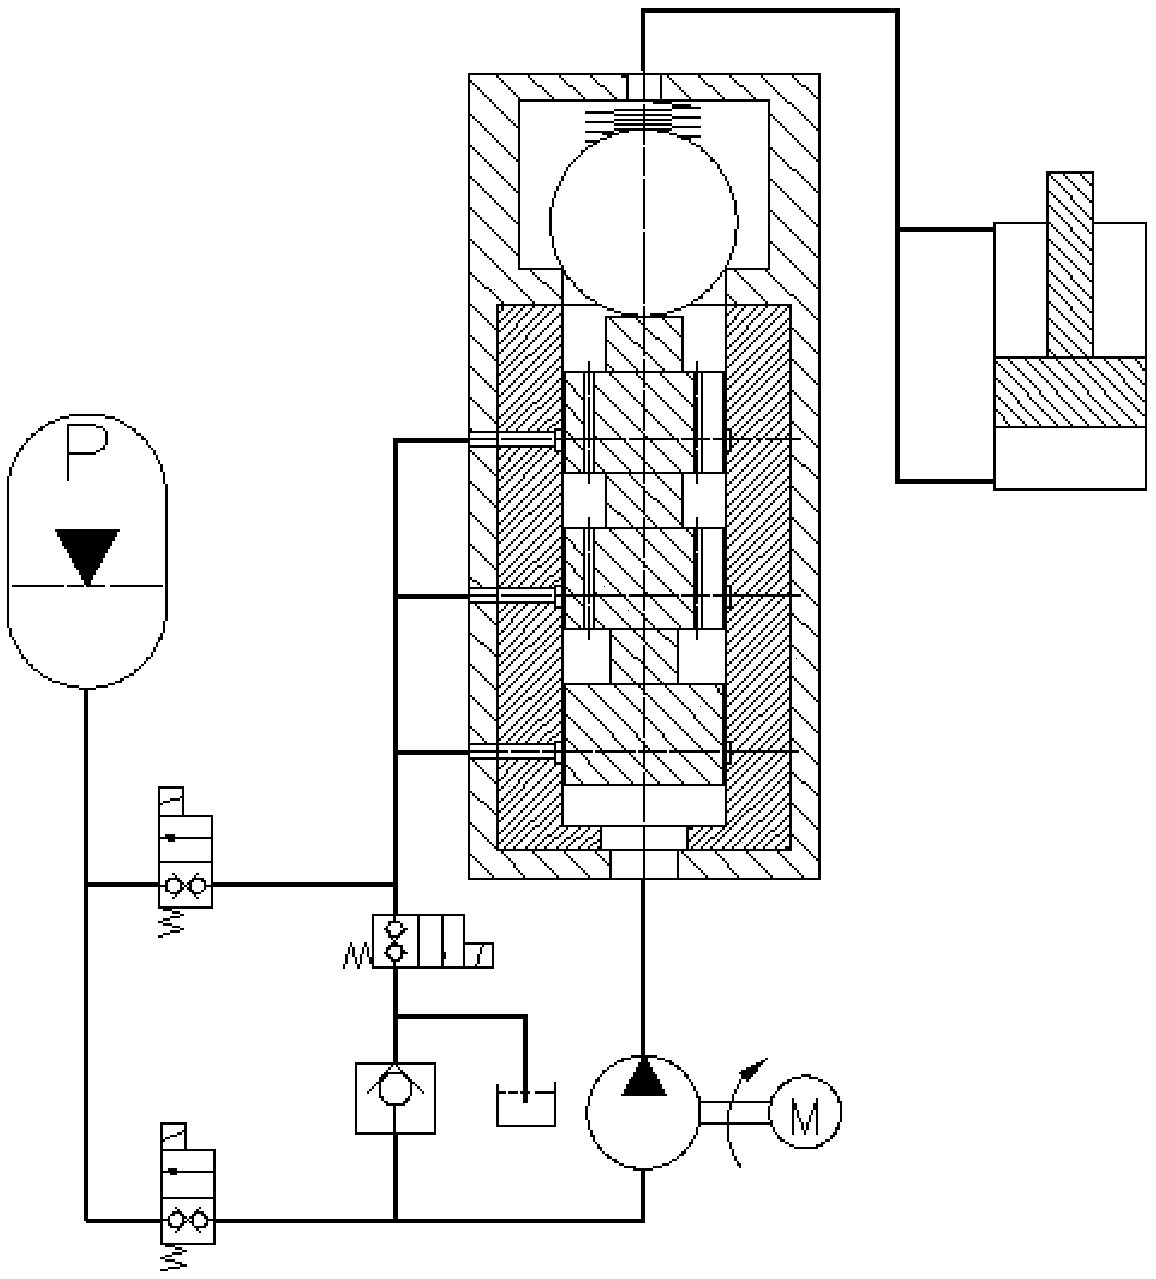 Flow-matched balance and energy recovery system